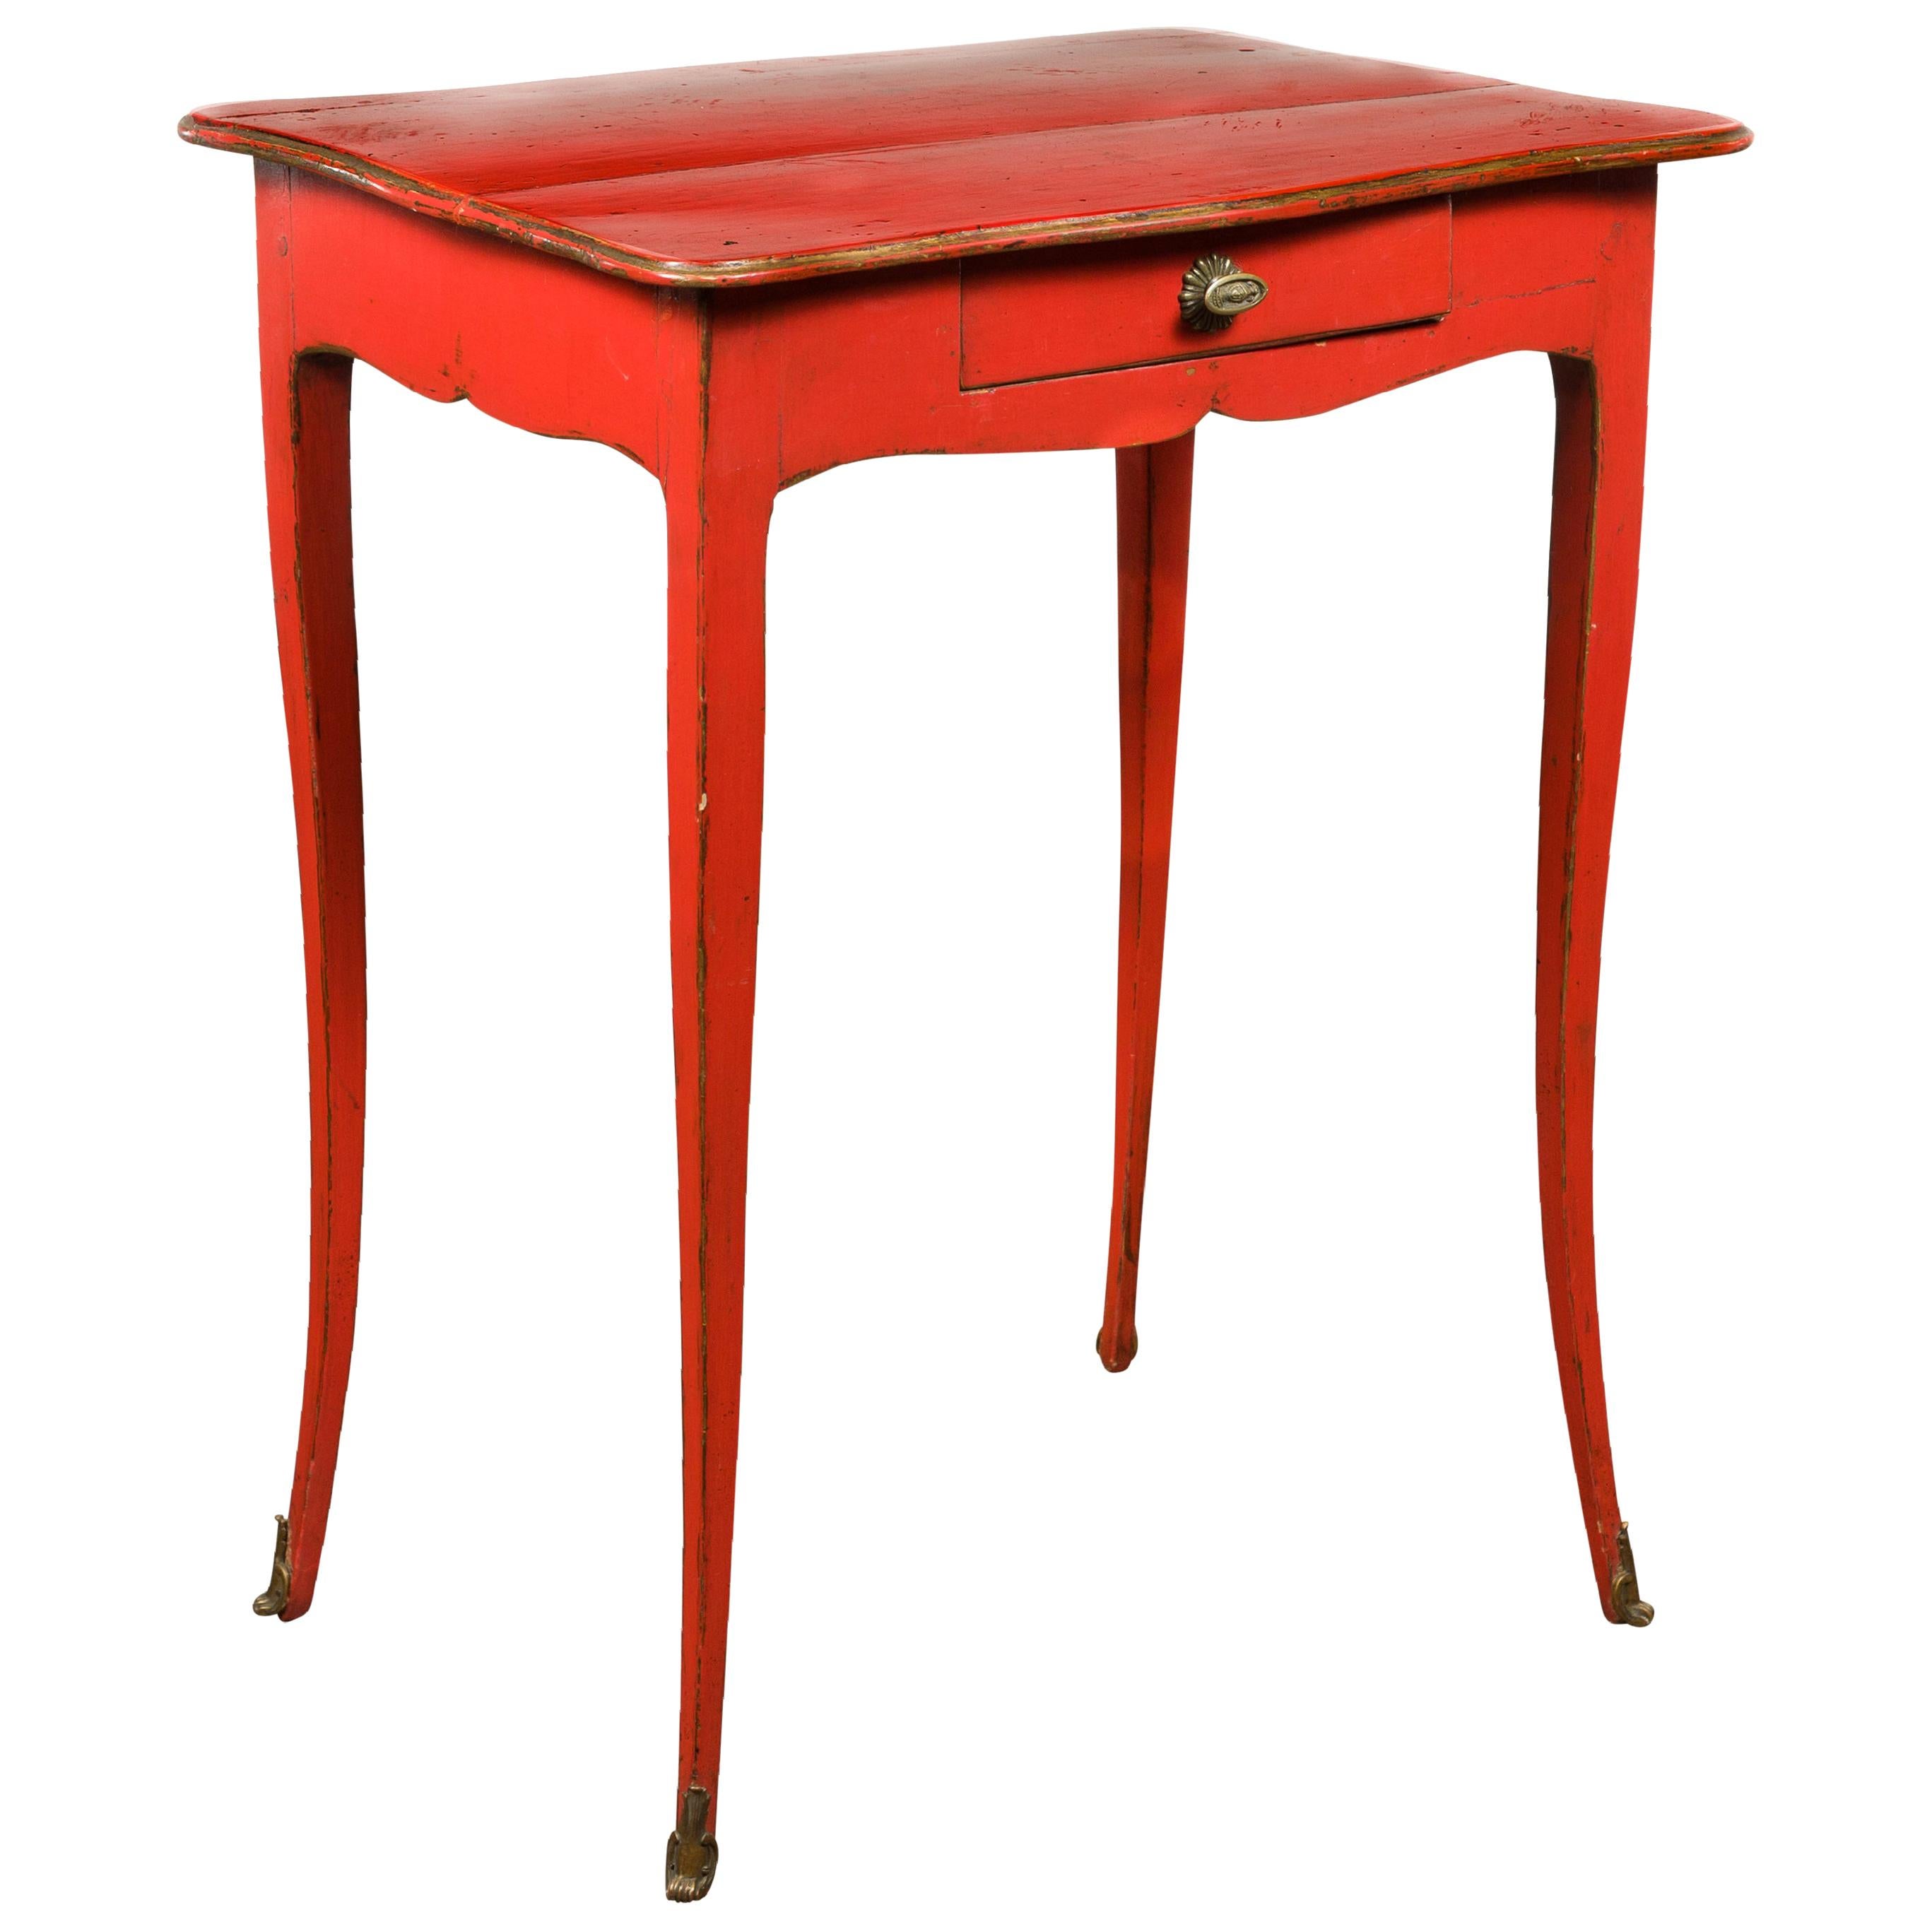 French 1820s Restauration Period Red Side Table with Serpentine Top and Drawer For Sale